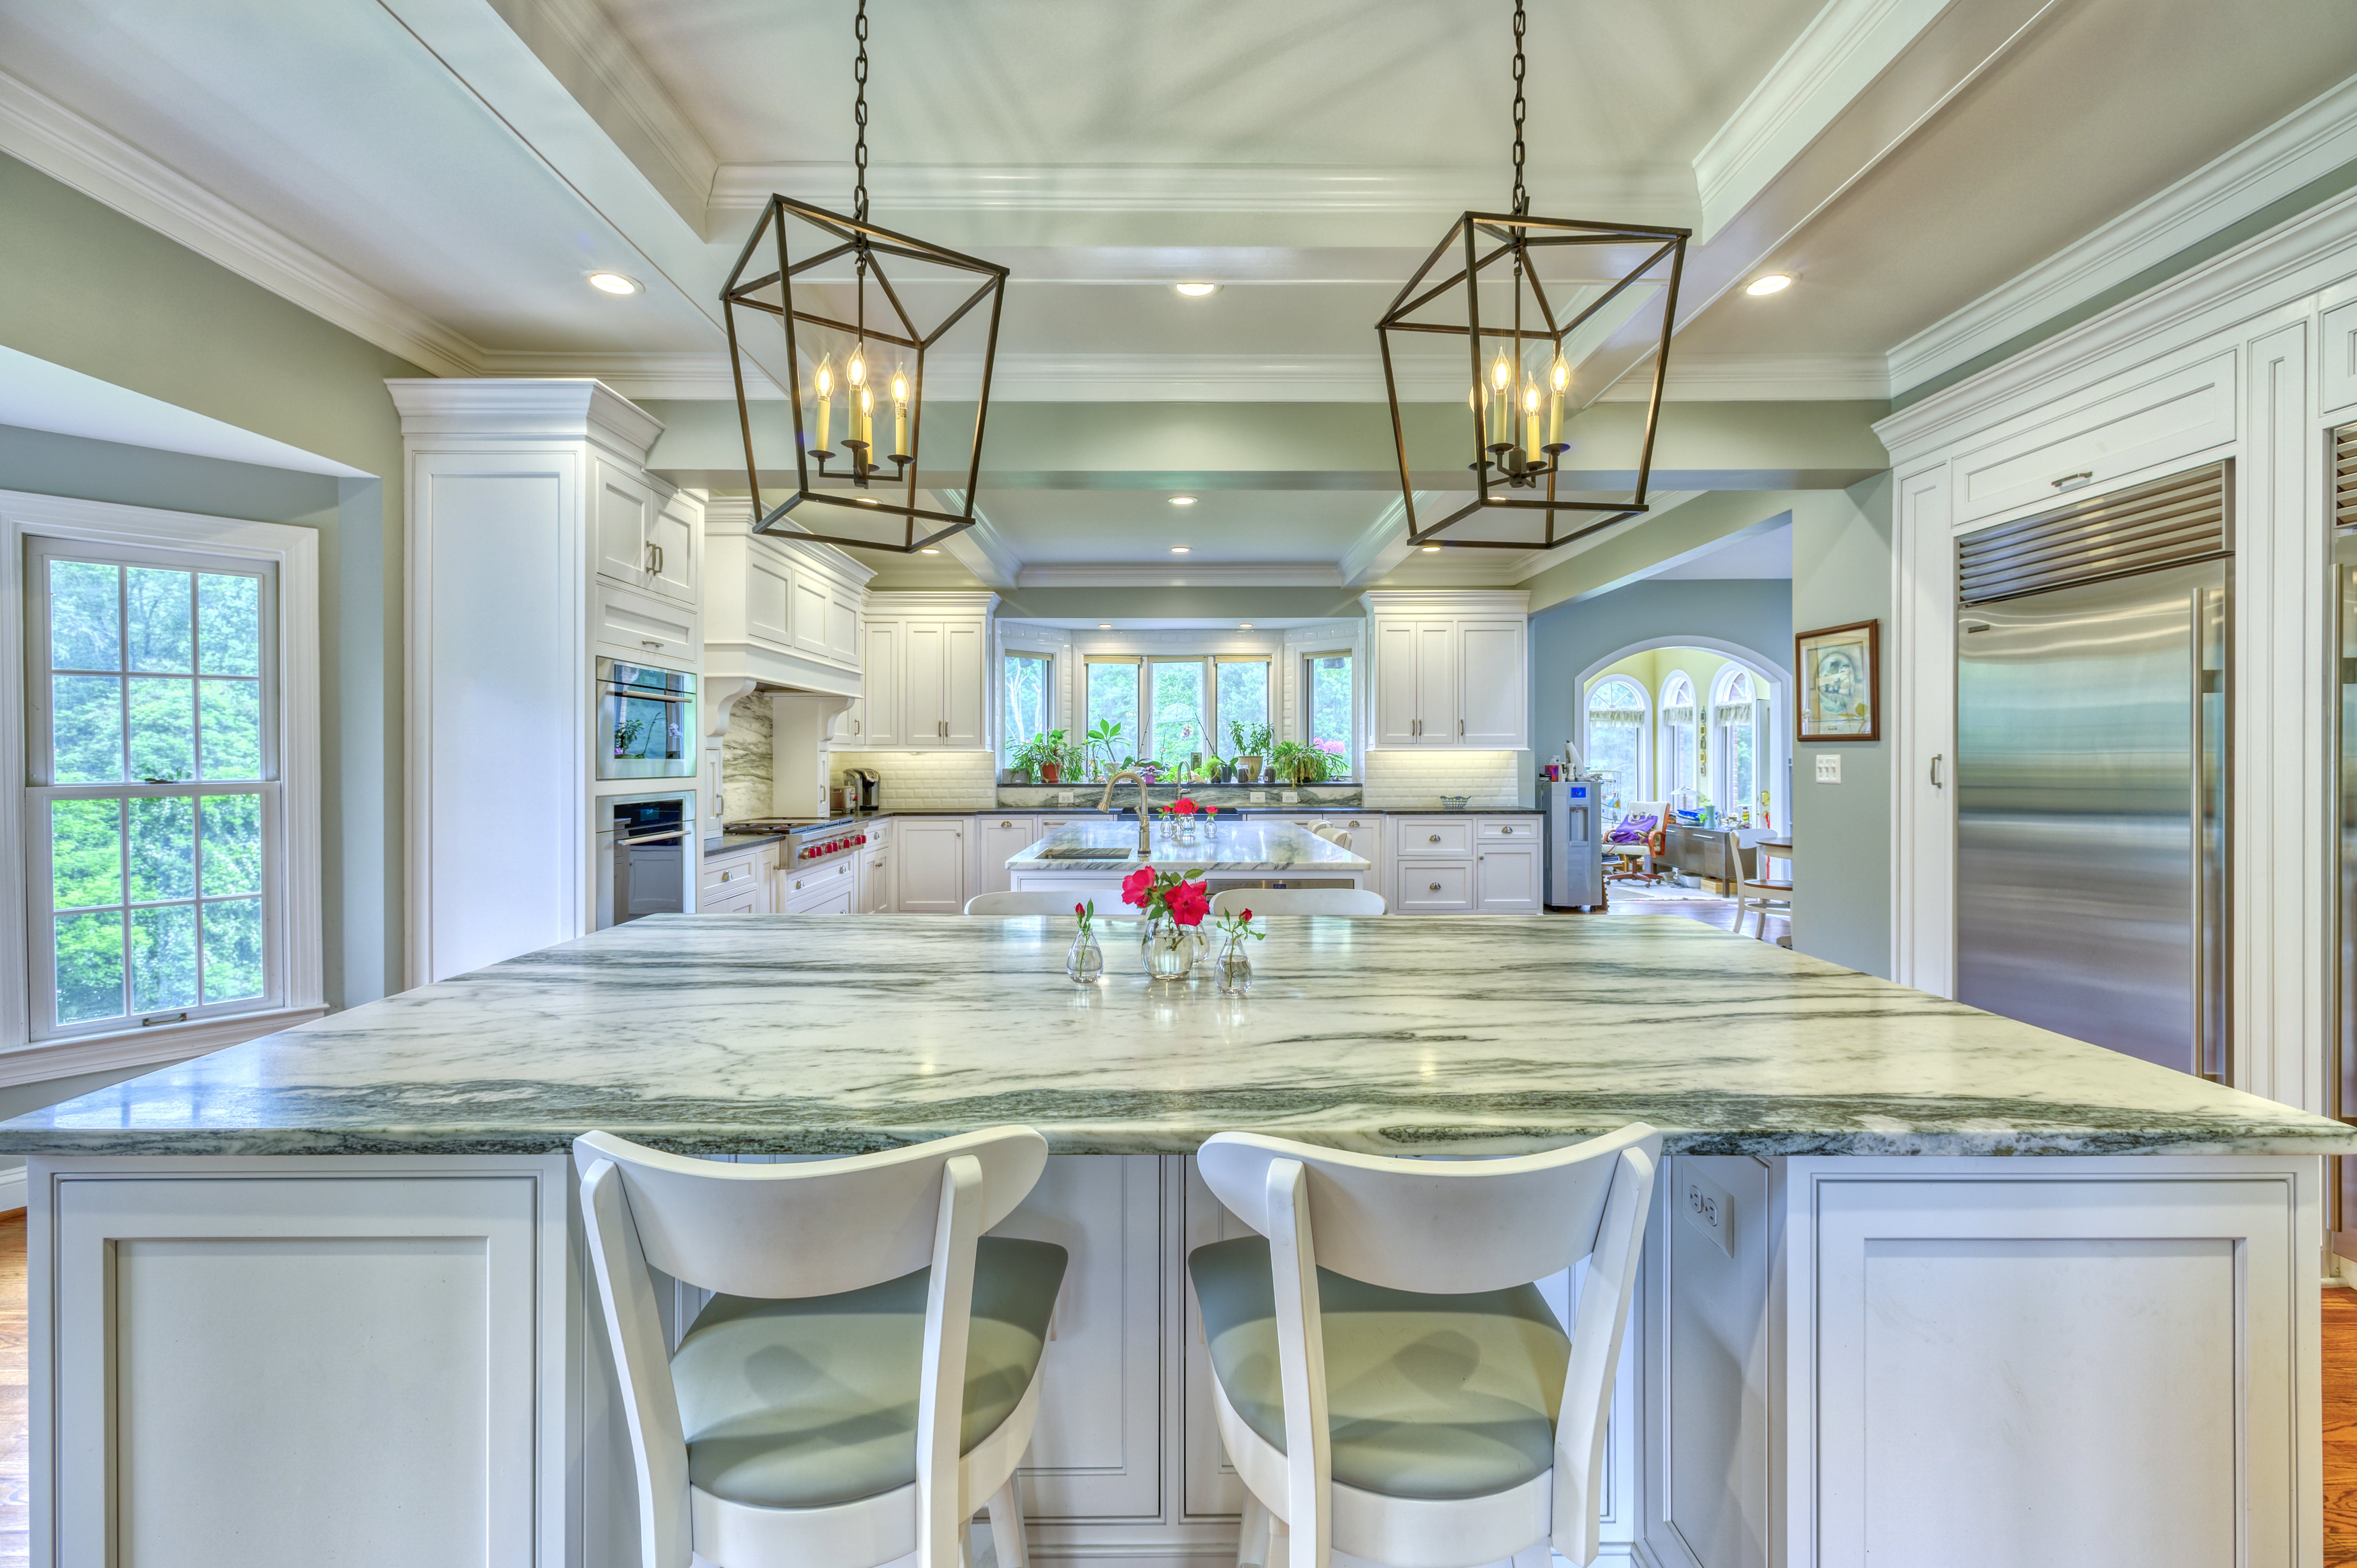 Kitchen island with granite countertop and pendant lighting above